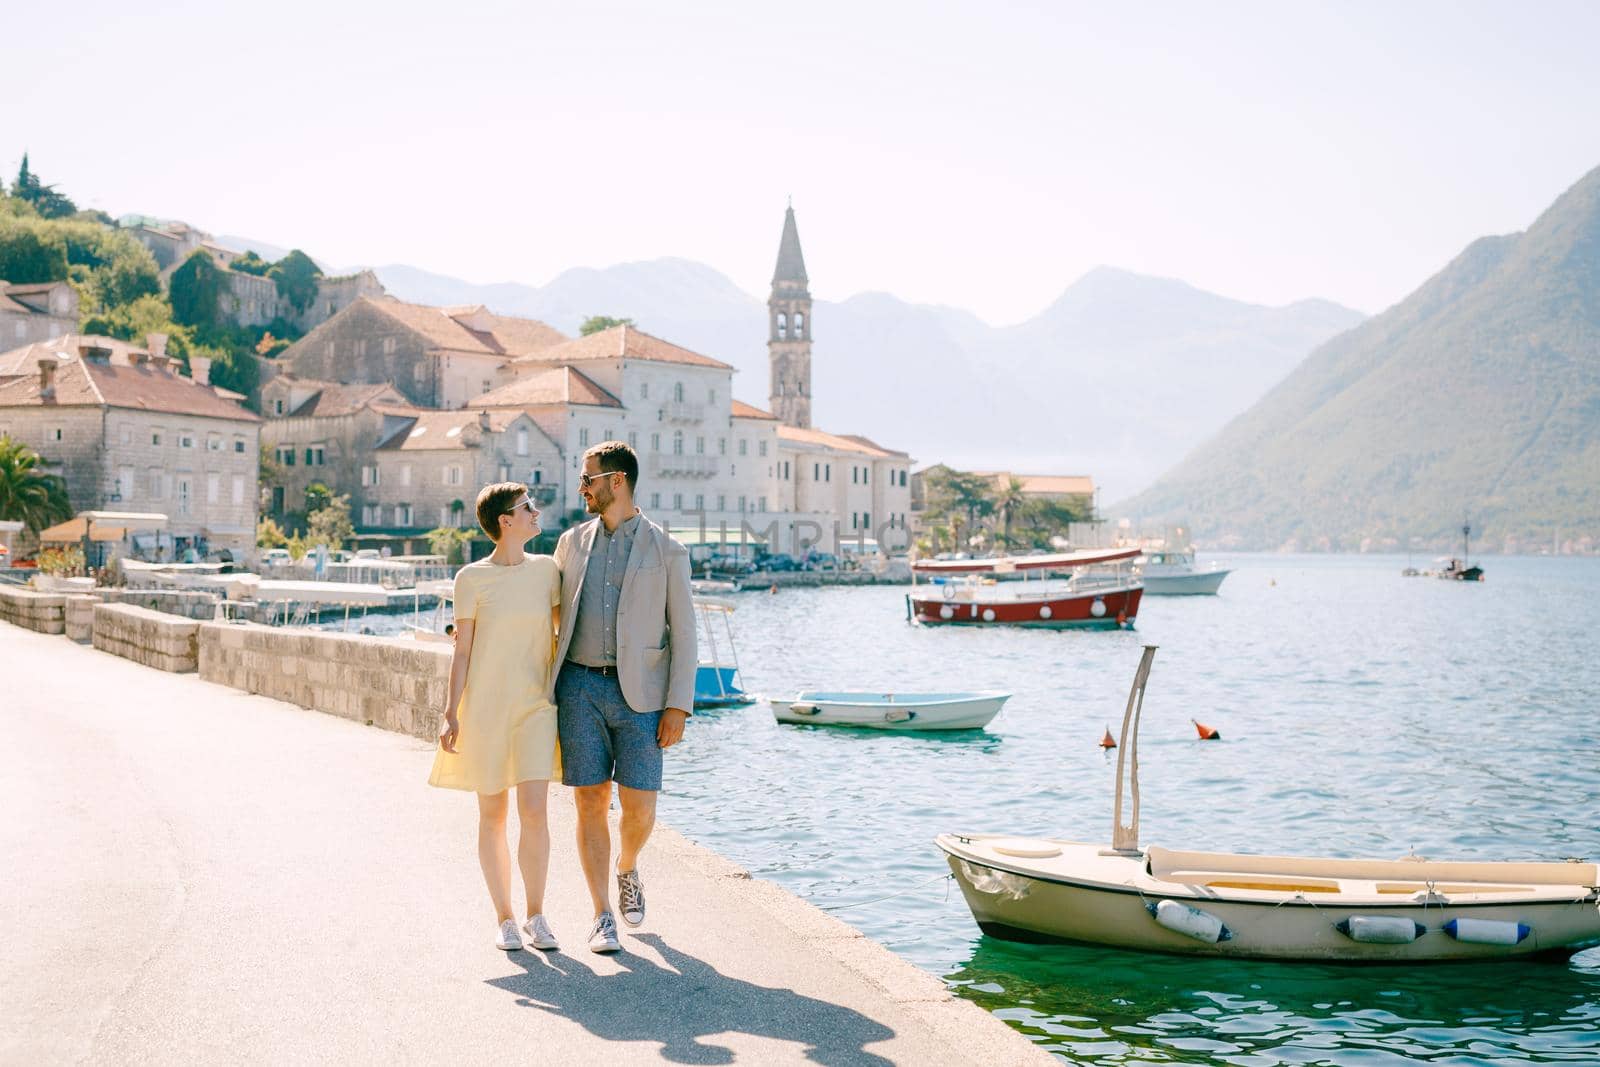 A man and a woman in sunglasses walk hugging each other on the pier near the boats in old town of Perast. High quality photo